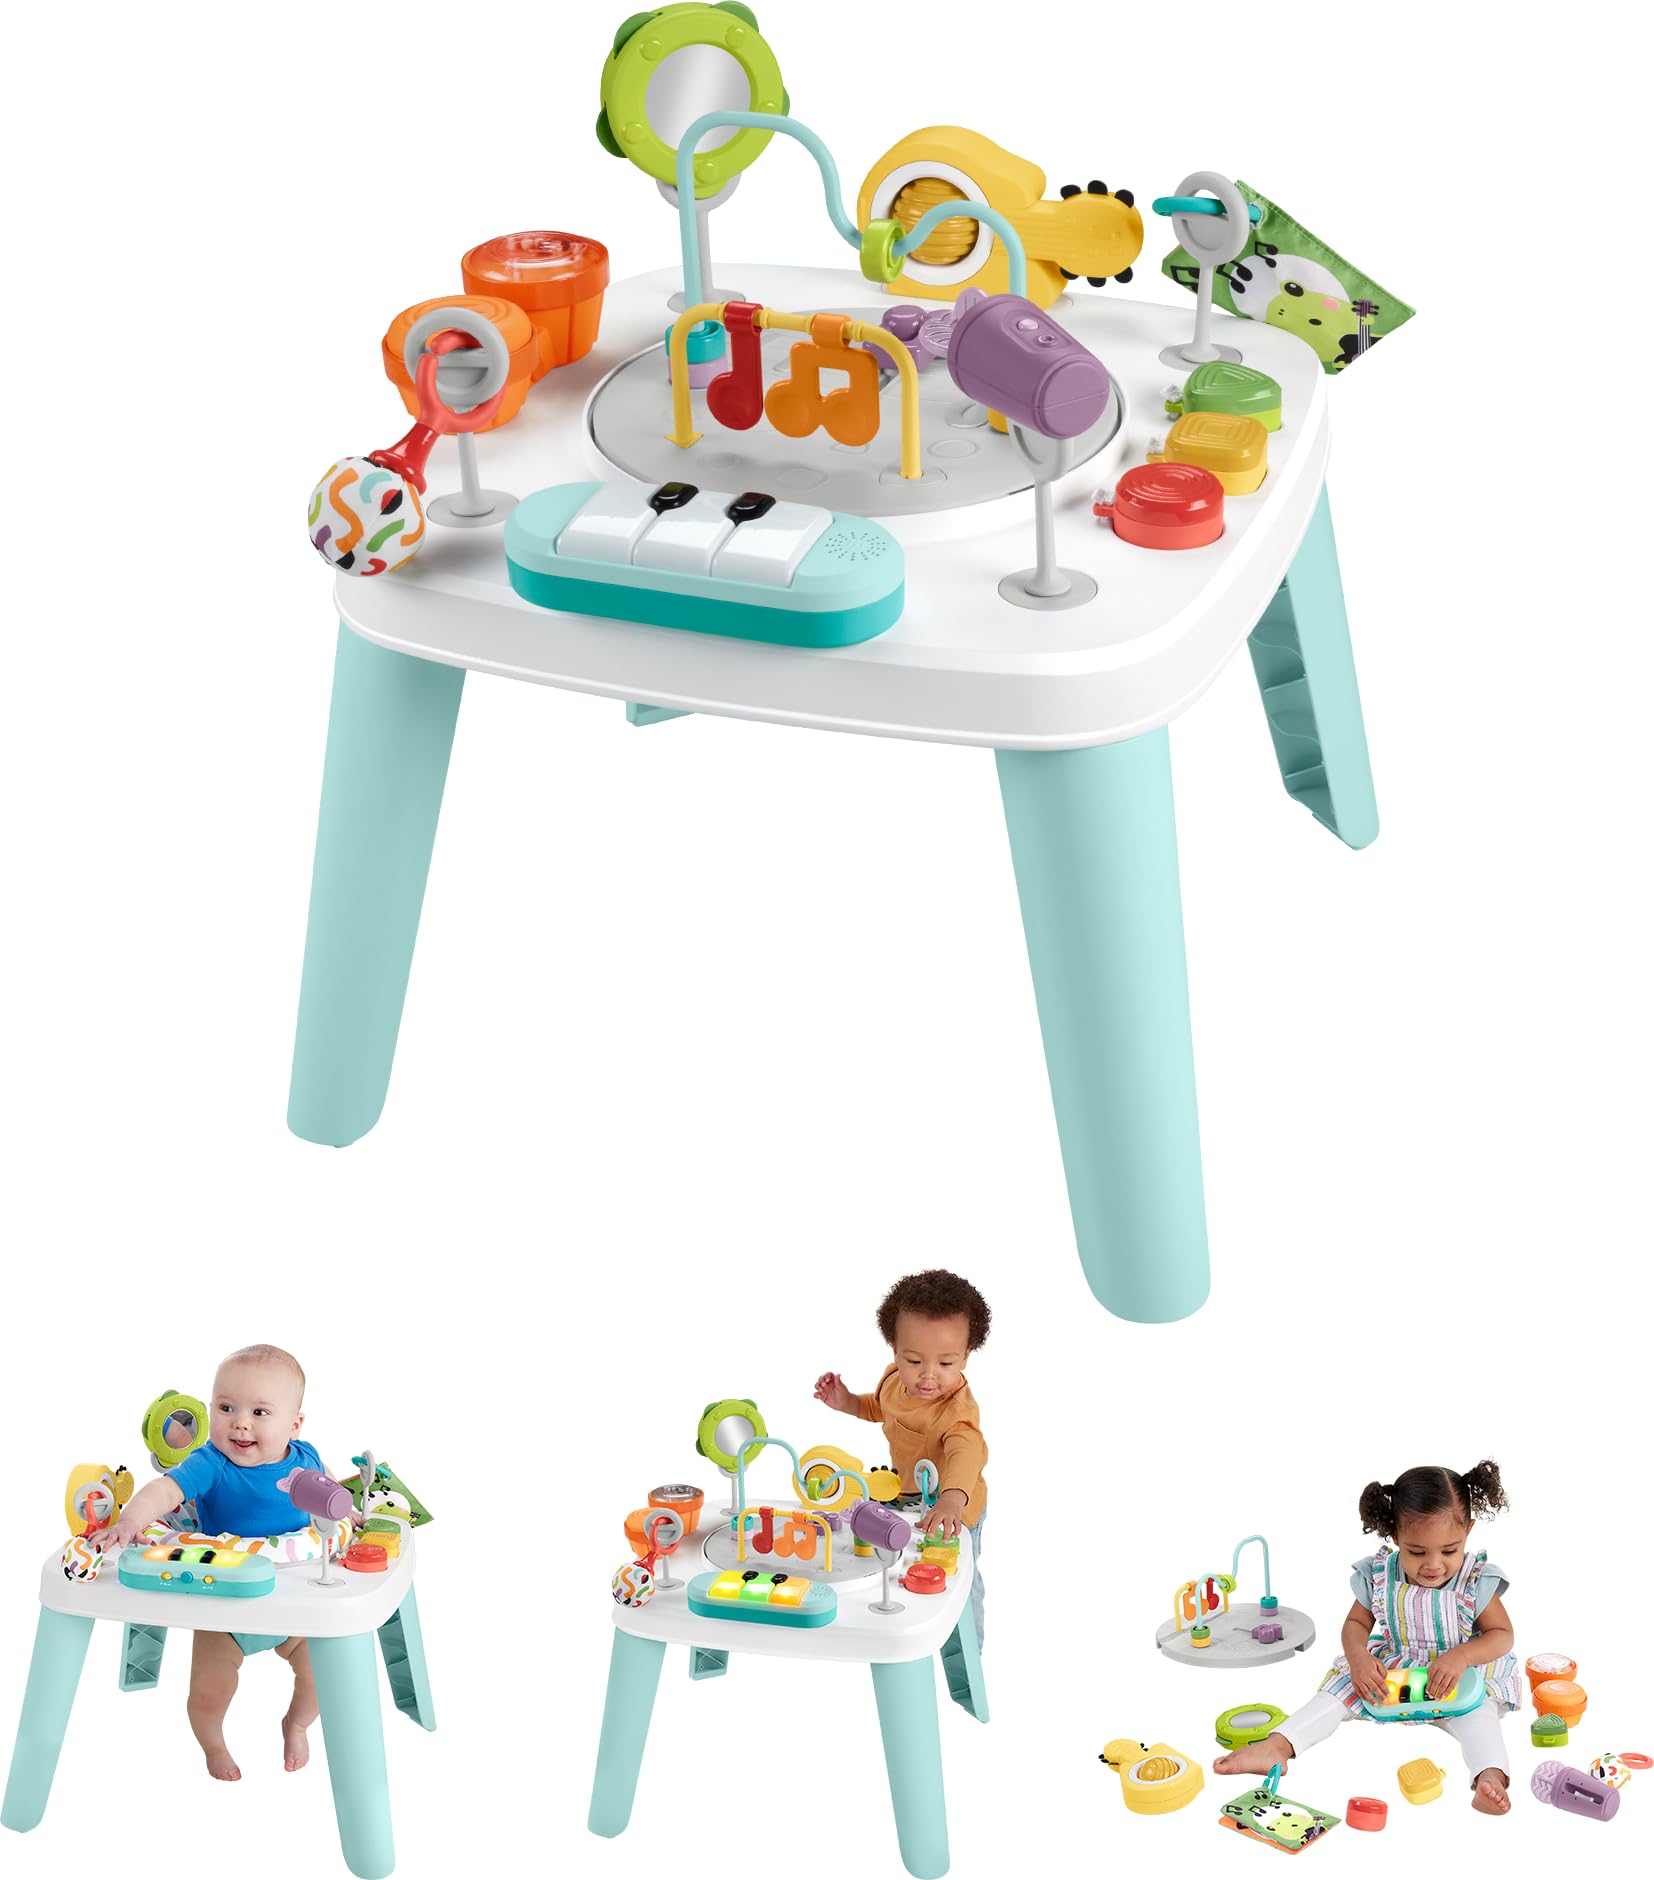 Fisher-Price Baby Toddler Toy 3-in-1 Hit Wonder Activity Center & Play Table with Music Lights & Developmental Toys Ages 6+ Months